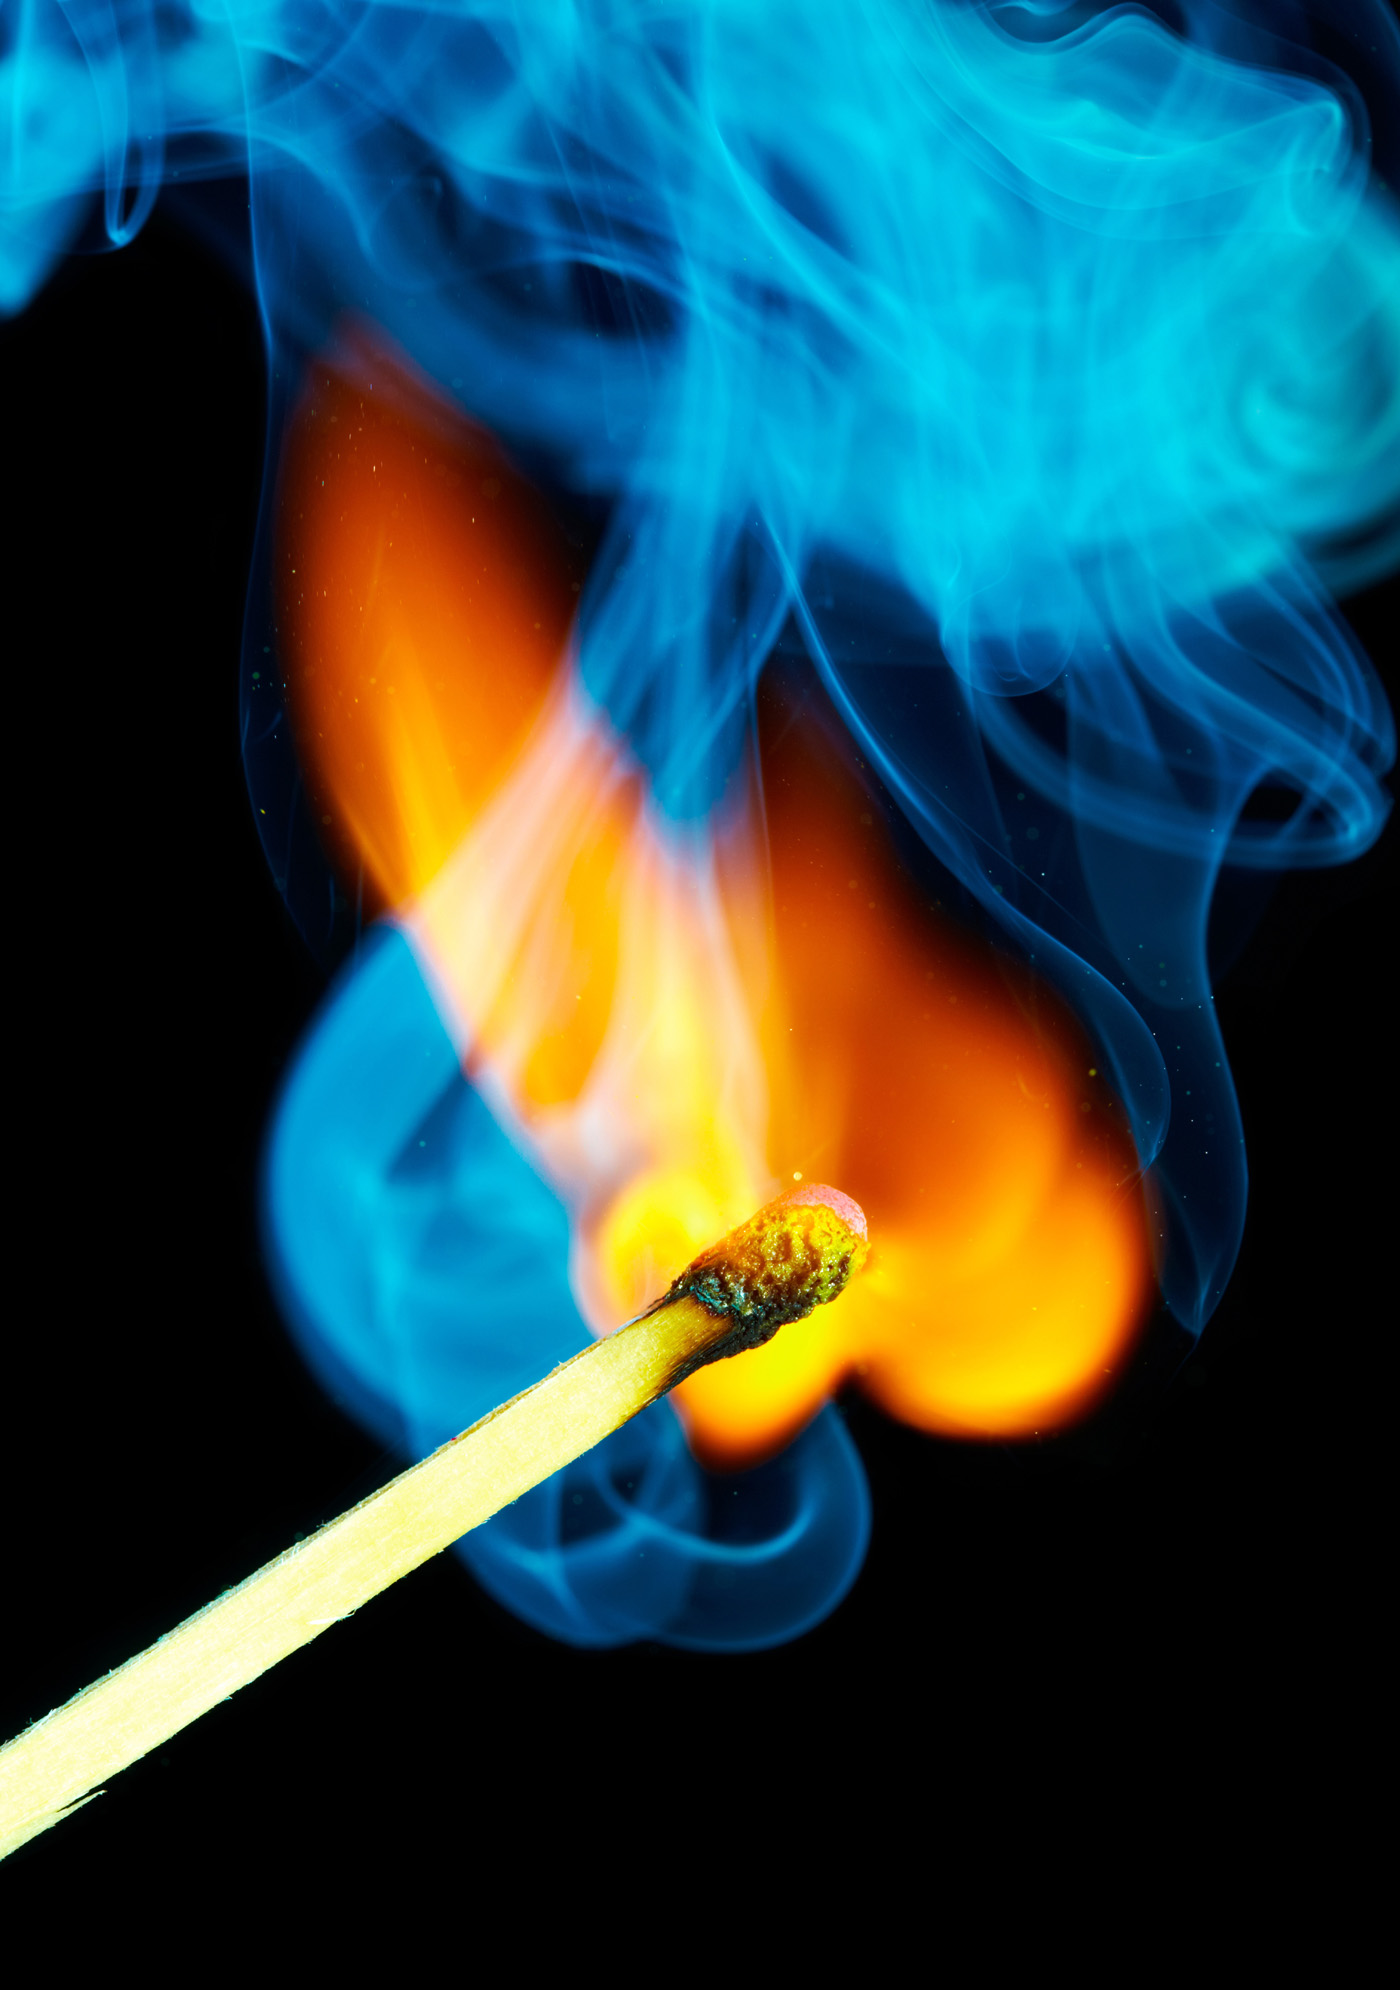 Free Images : hand, smoke, ash, cigarette, close up, embers, macro photography 5890x3802 ...